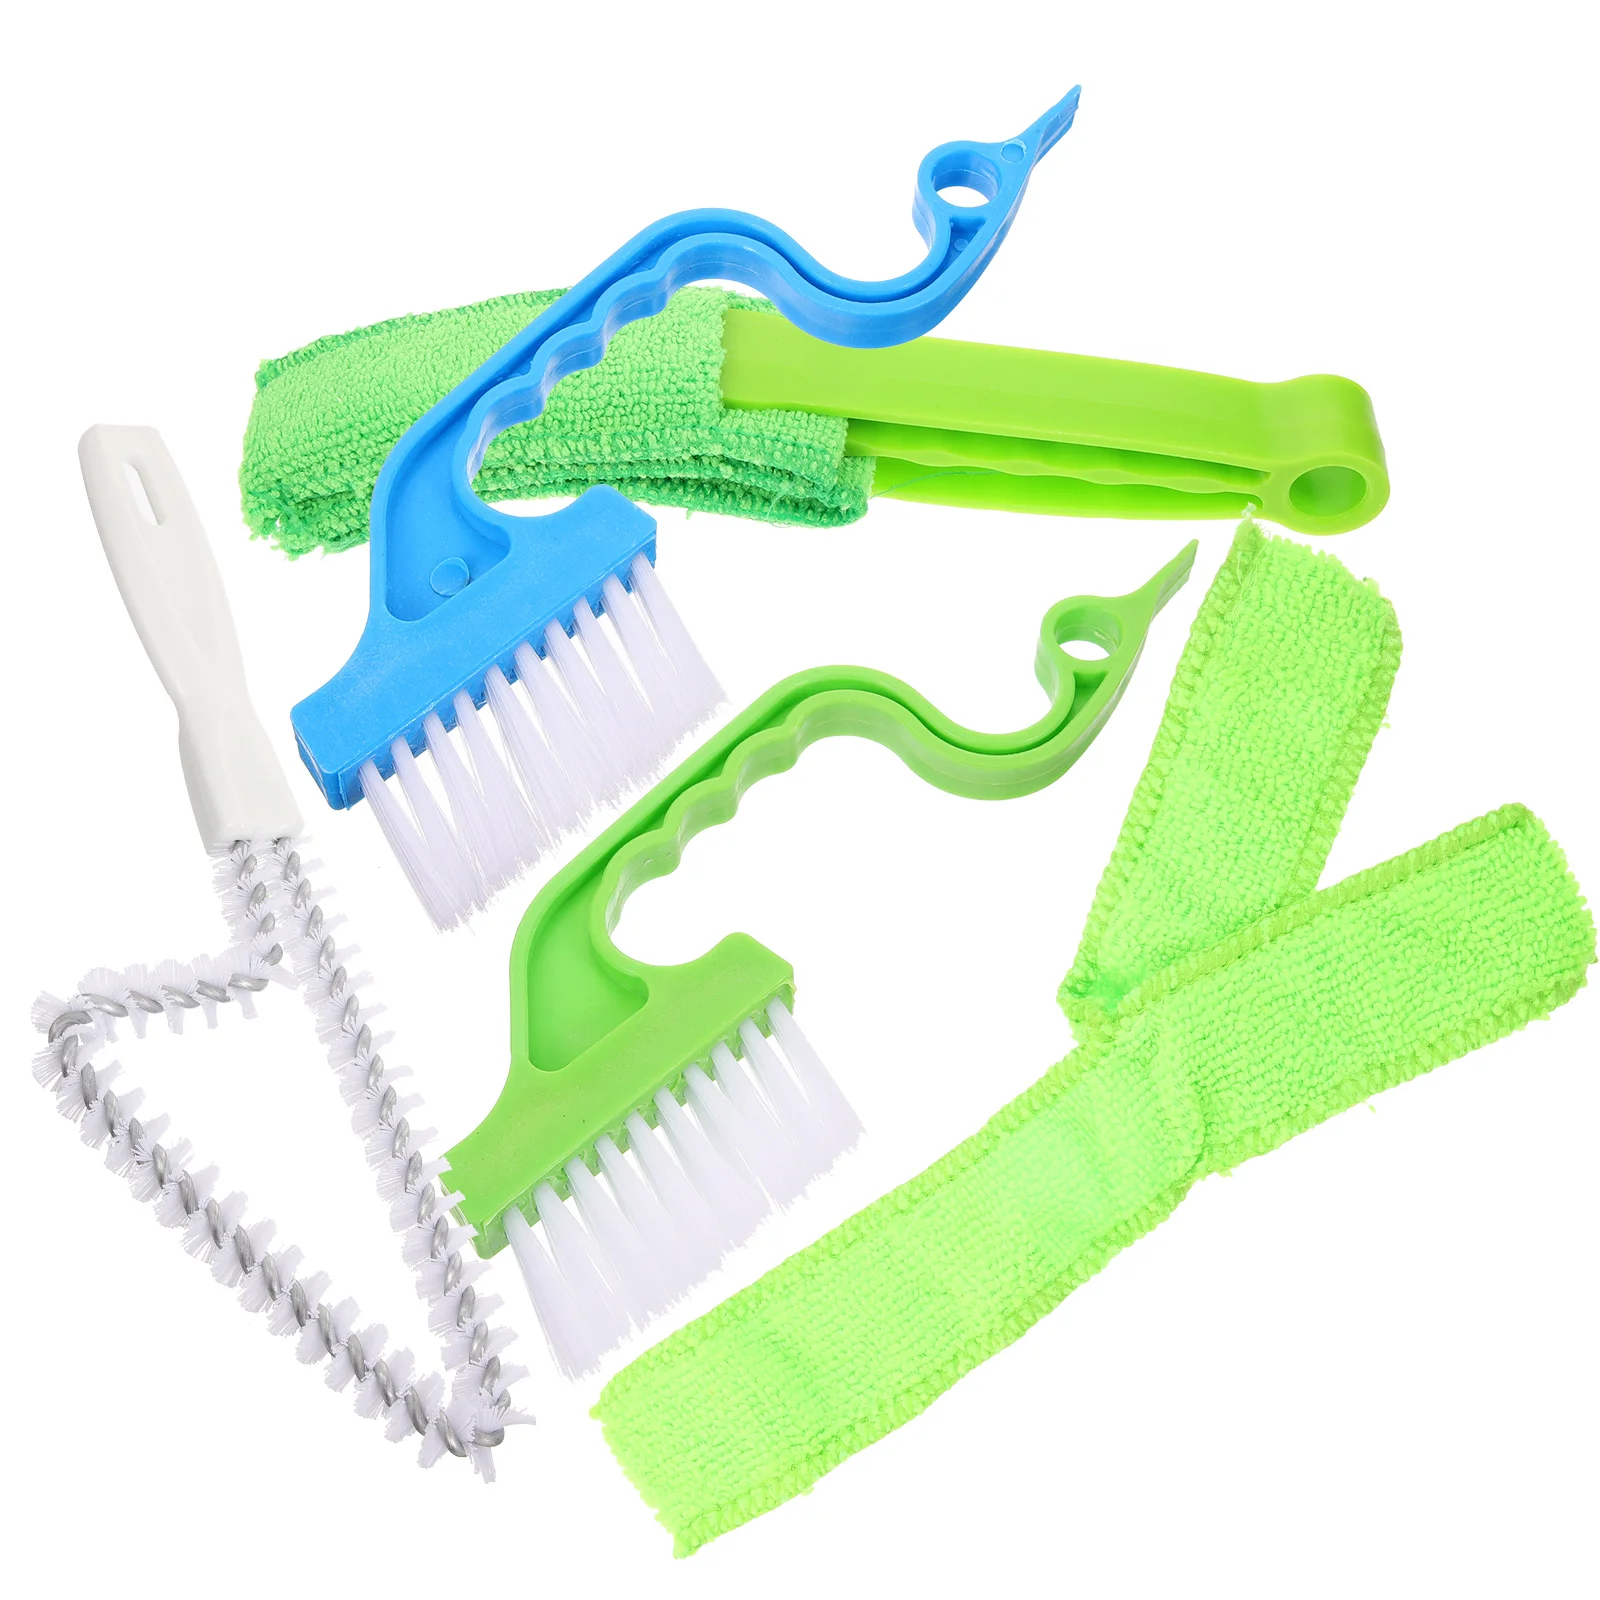 

Window Cleaning Supplies Gaps Brush Blinds Seam Cleansing Tile Crevice Groove Household